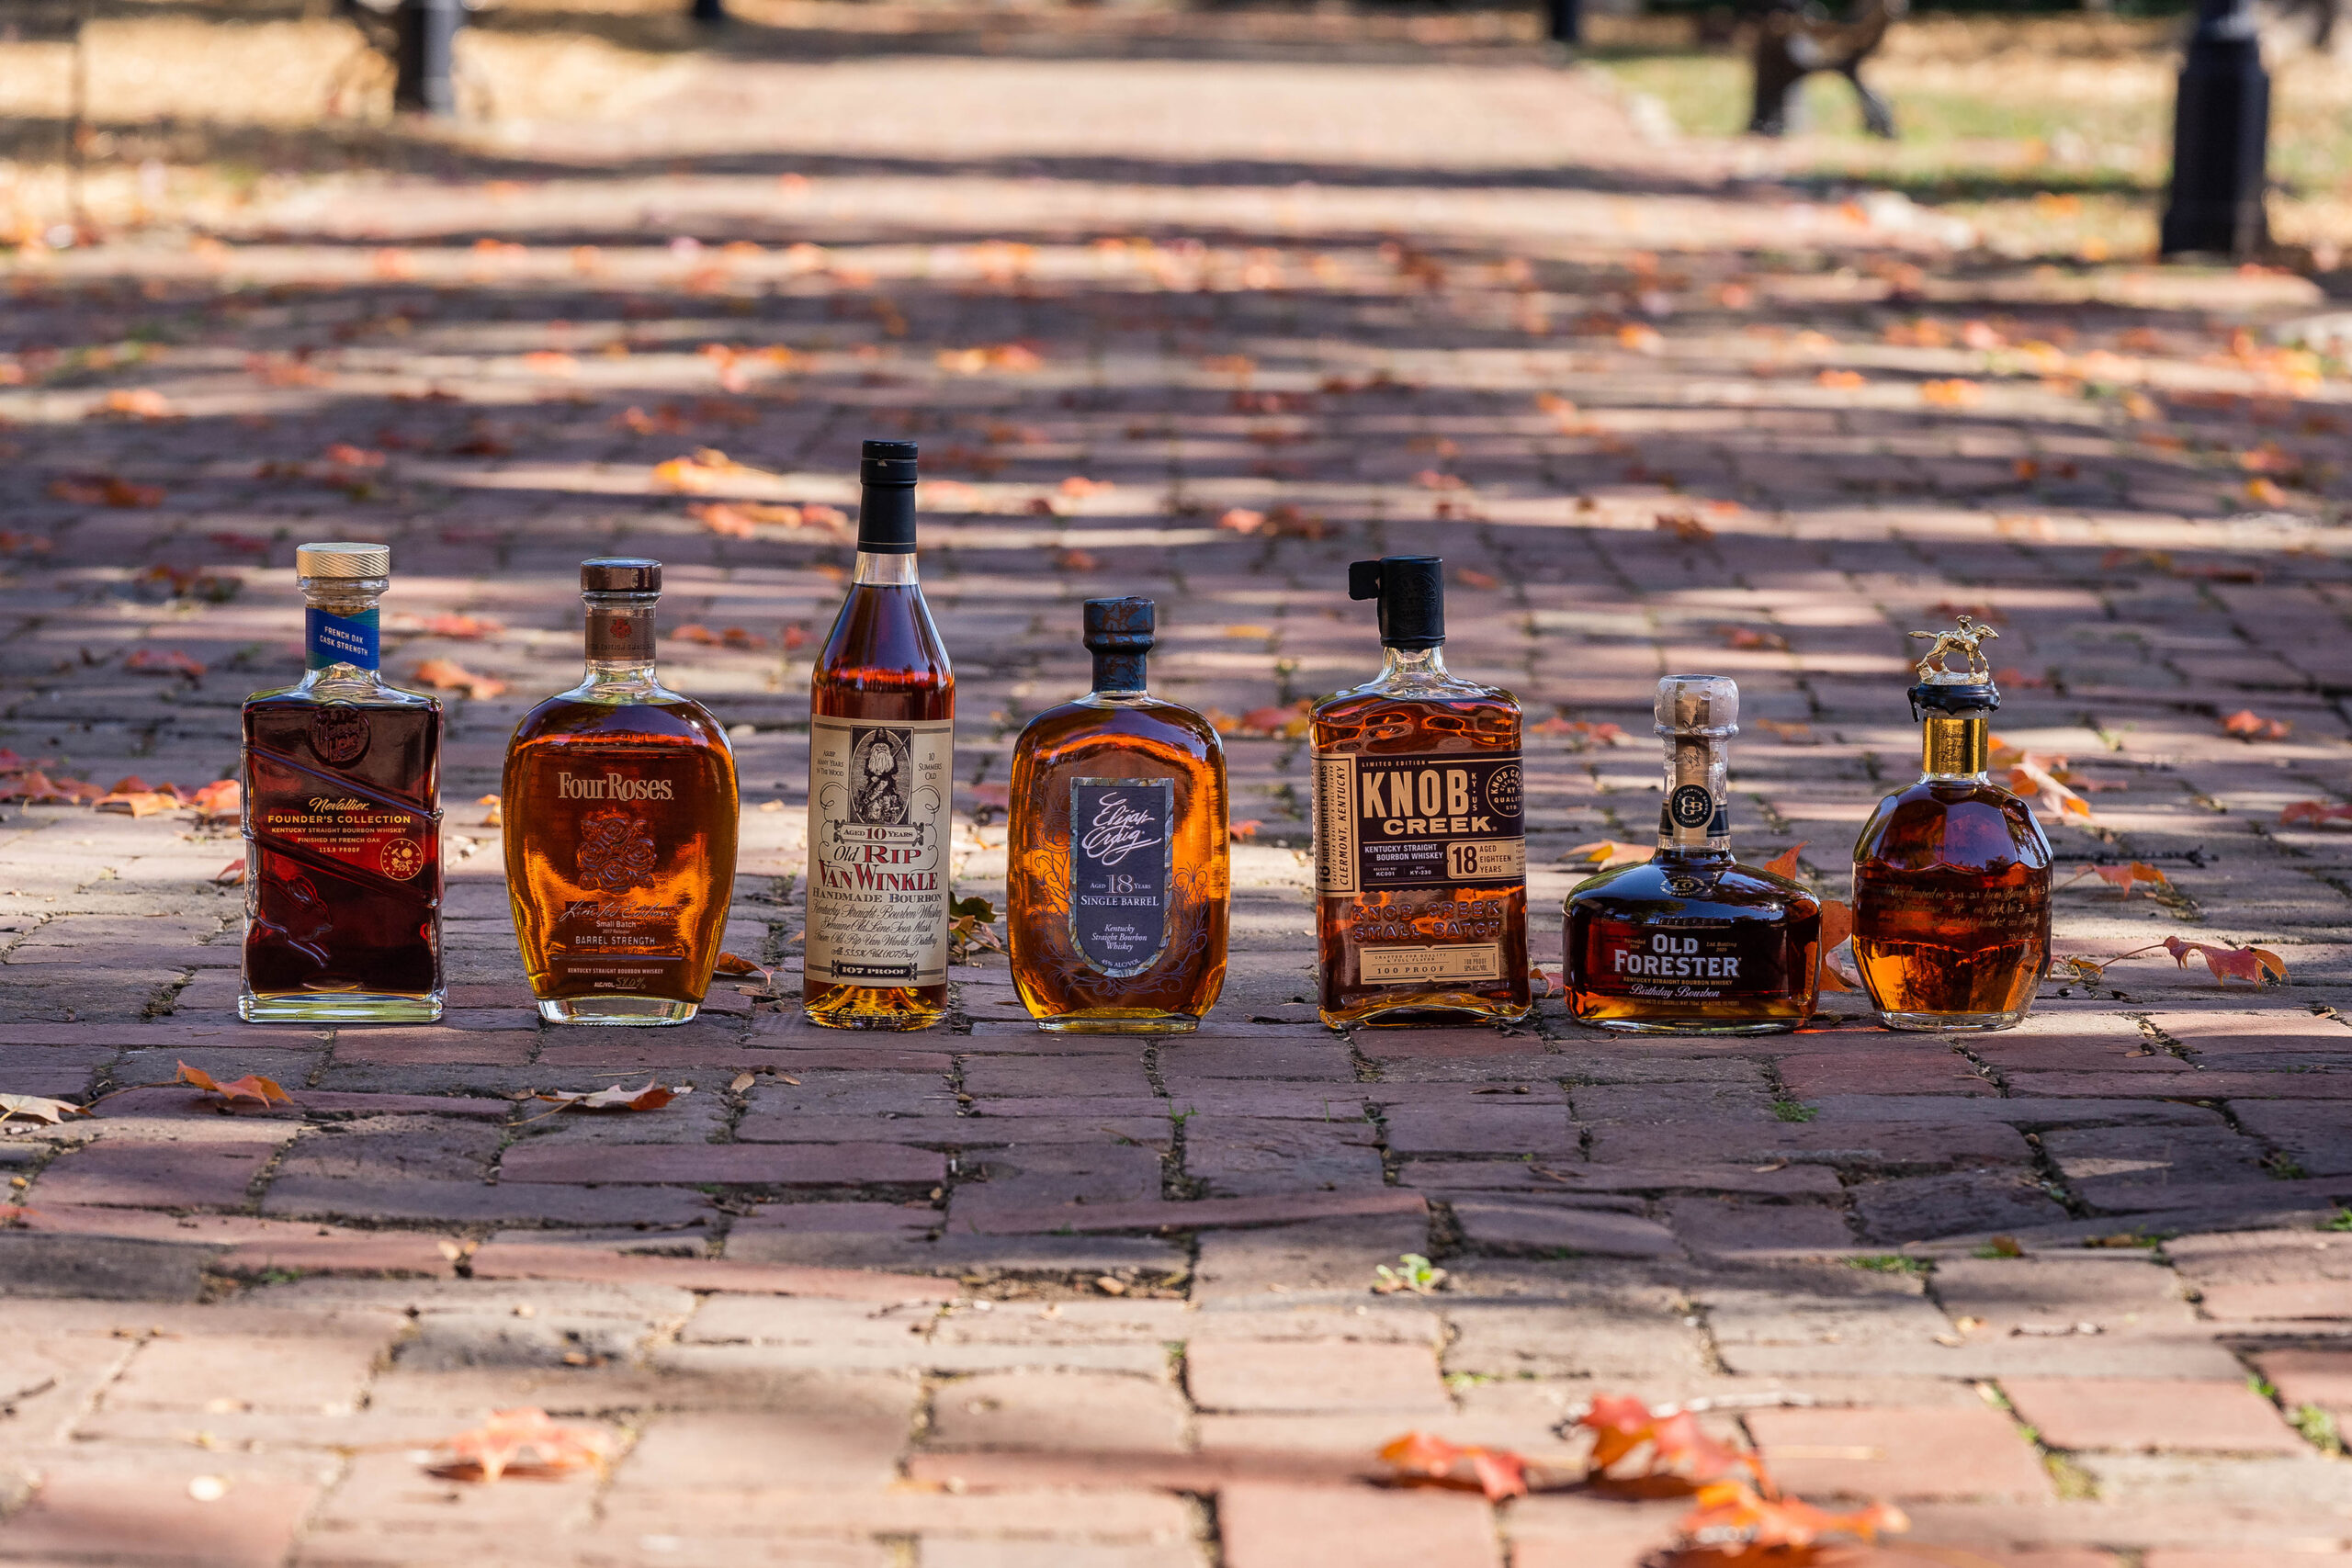 Epic Bourbon Raffle: Perfect Chance To Win An Amazing Collection